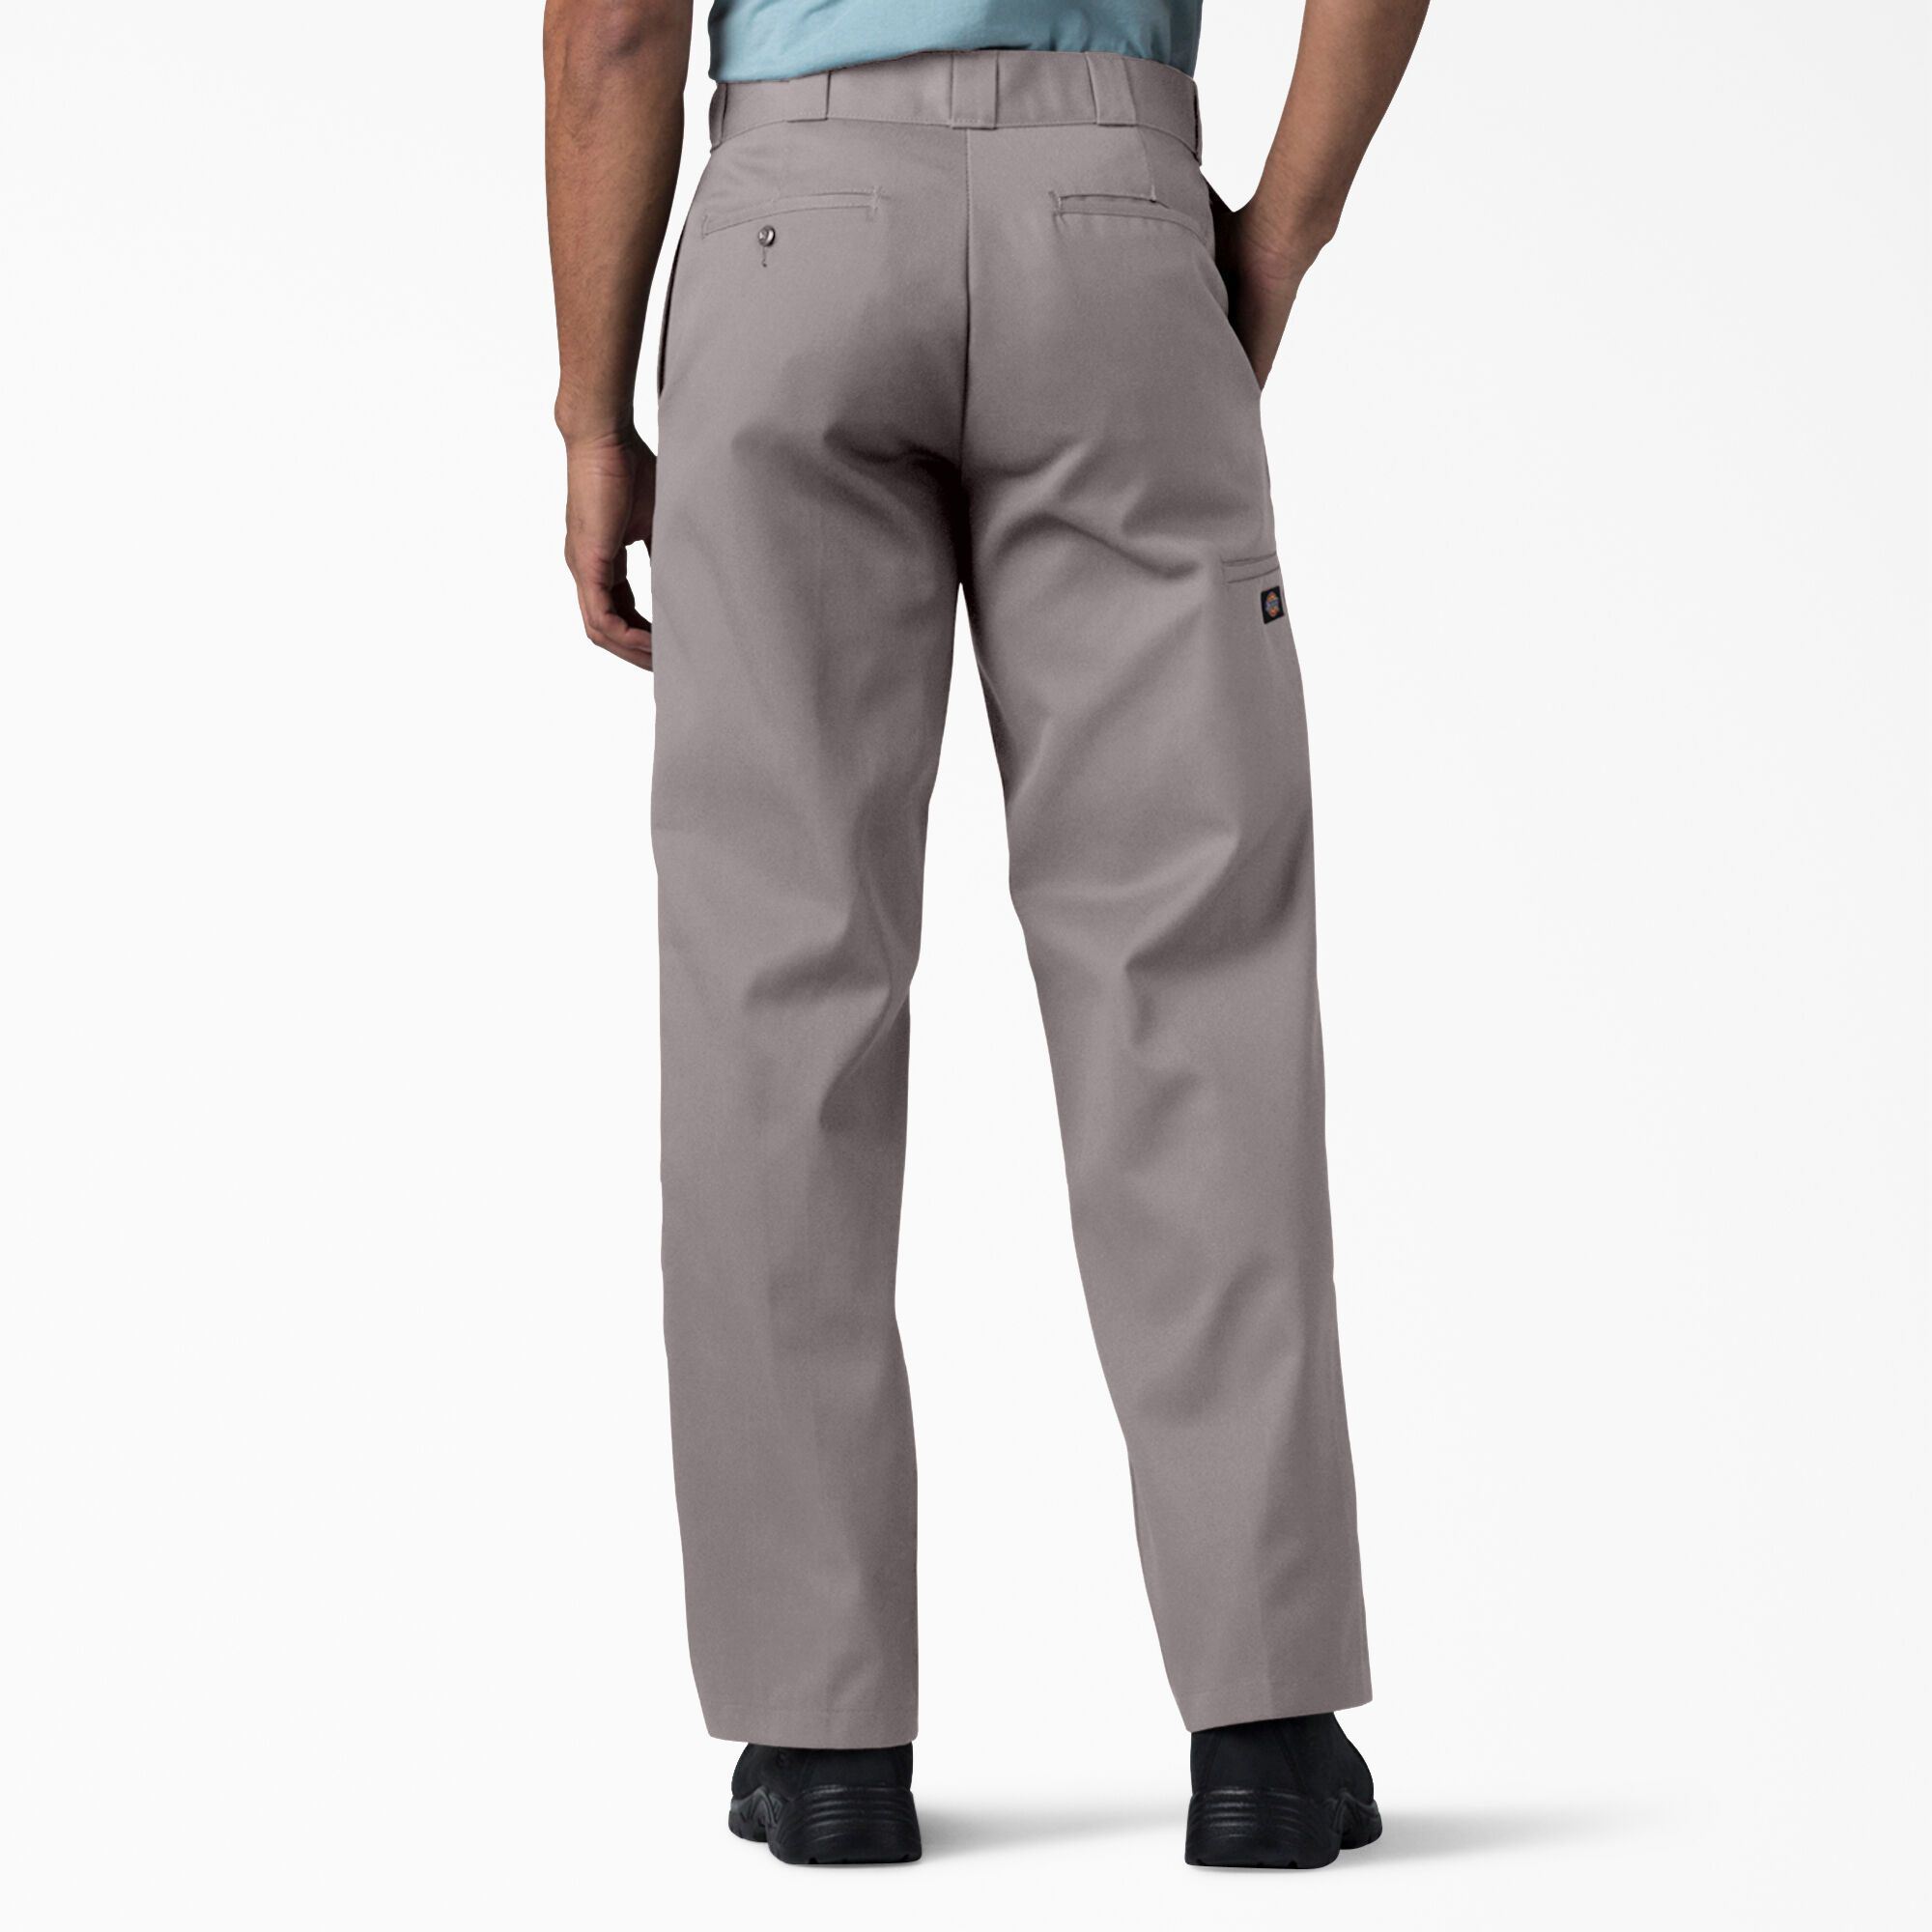 Loose Fit Double Knee Work Pants, Silver